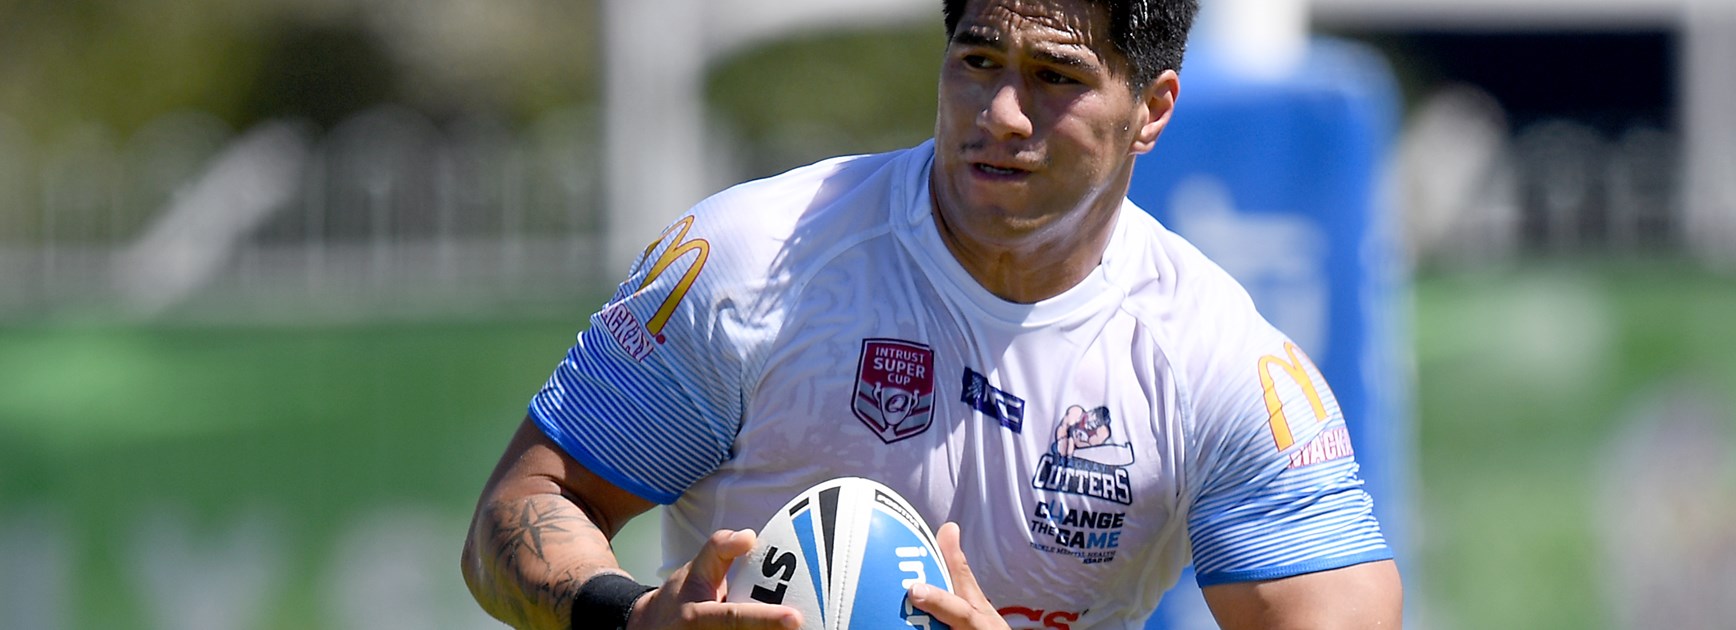 Intrust Super Cup's would-be Warriors?